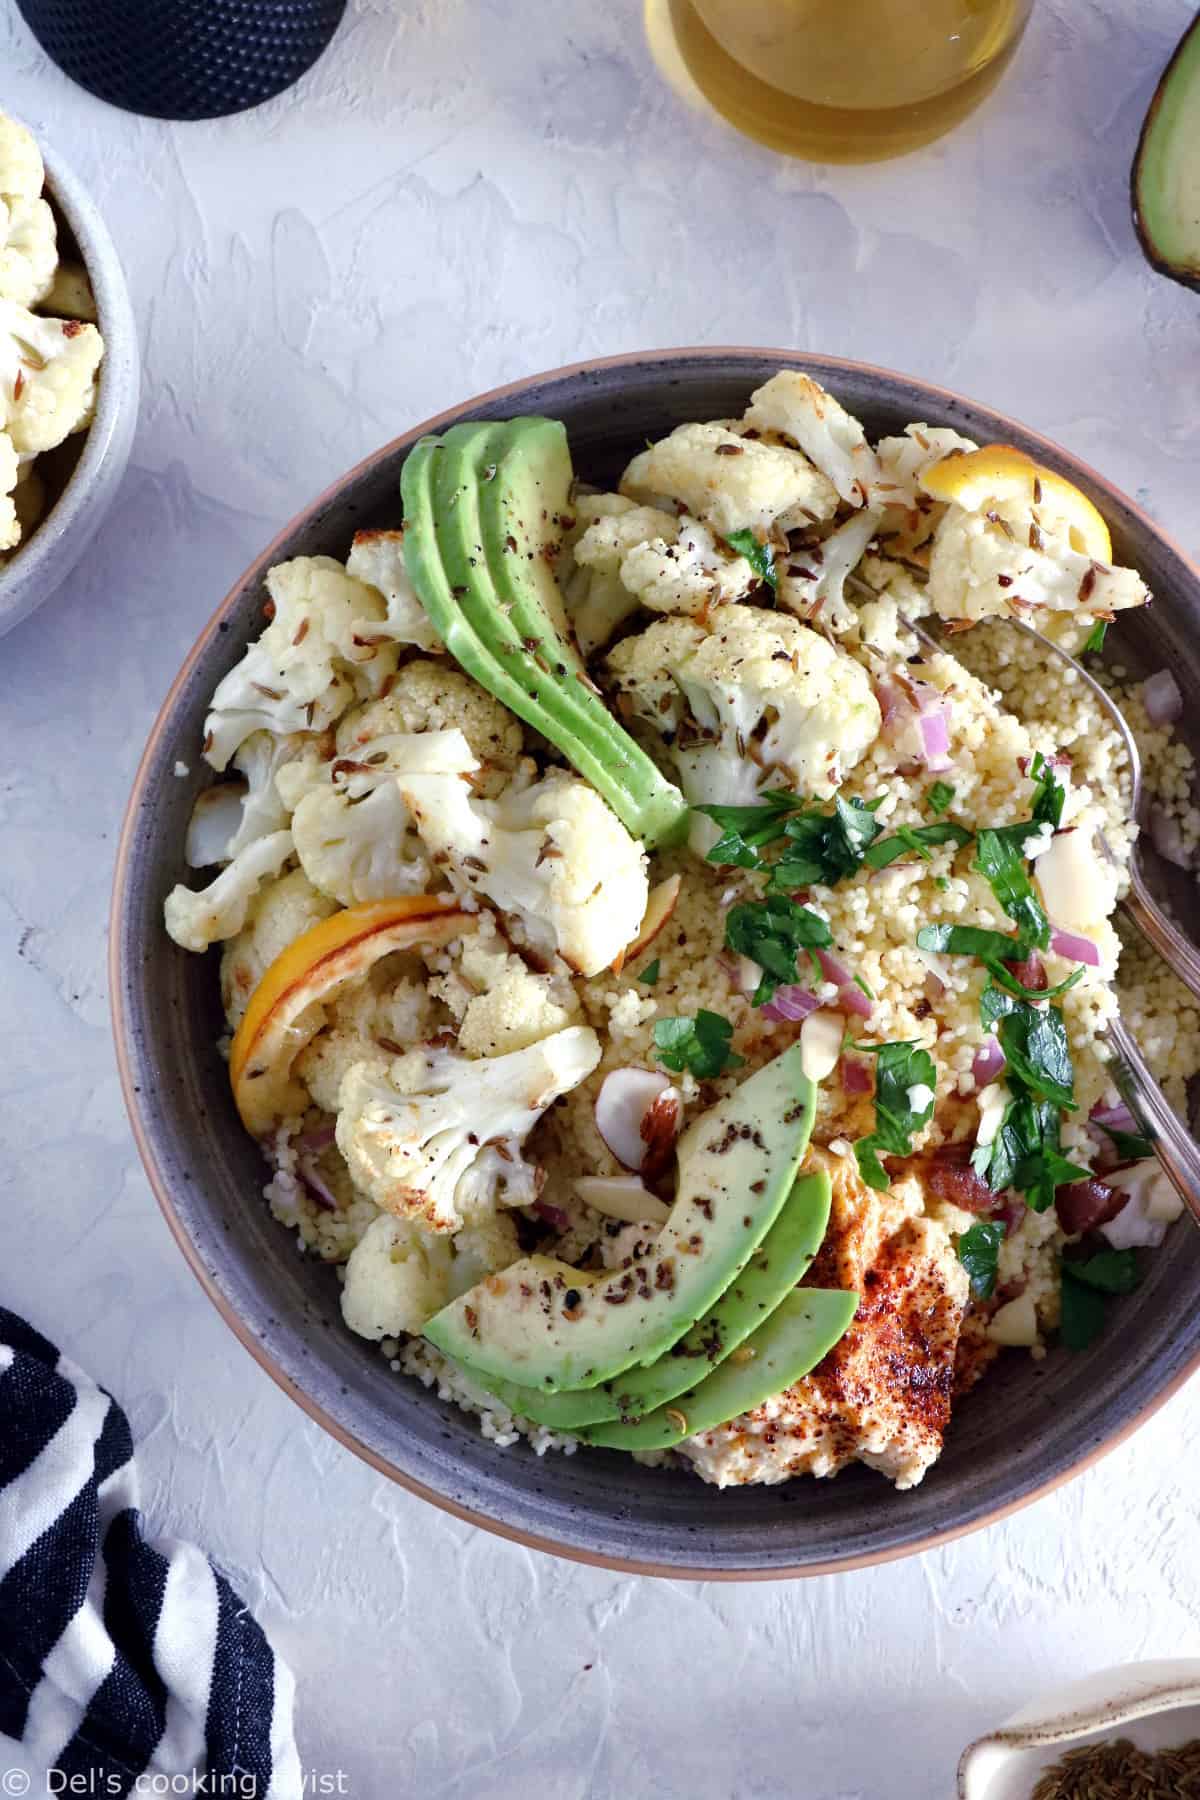 This quick and easy cumin-roasted cauliflower tabbouleh salad is game-changing. It's a super healthy vegan salad recipe, packed with delicious roasted veggies, fresh herbs, and loaded with plant-based protein.